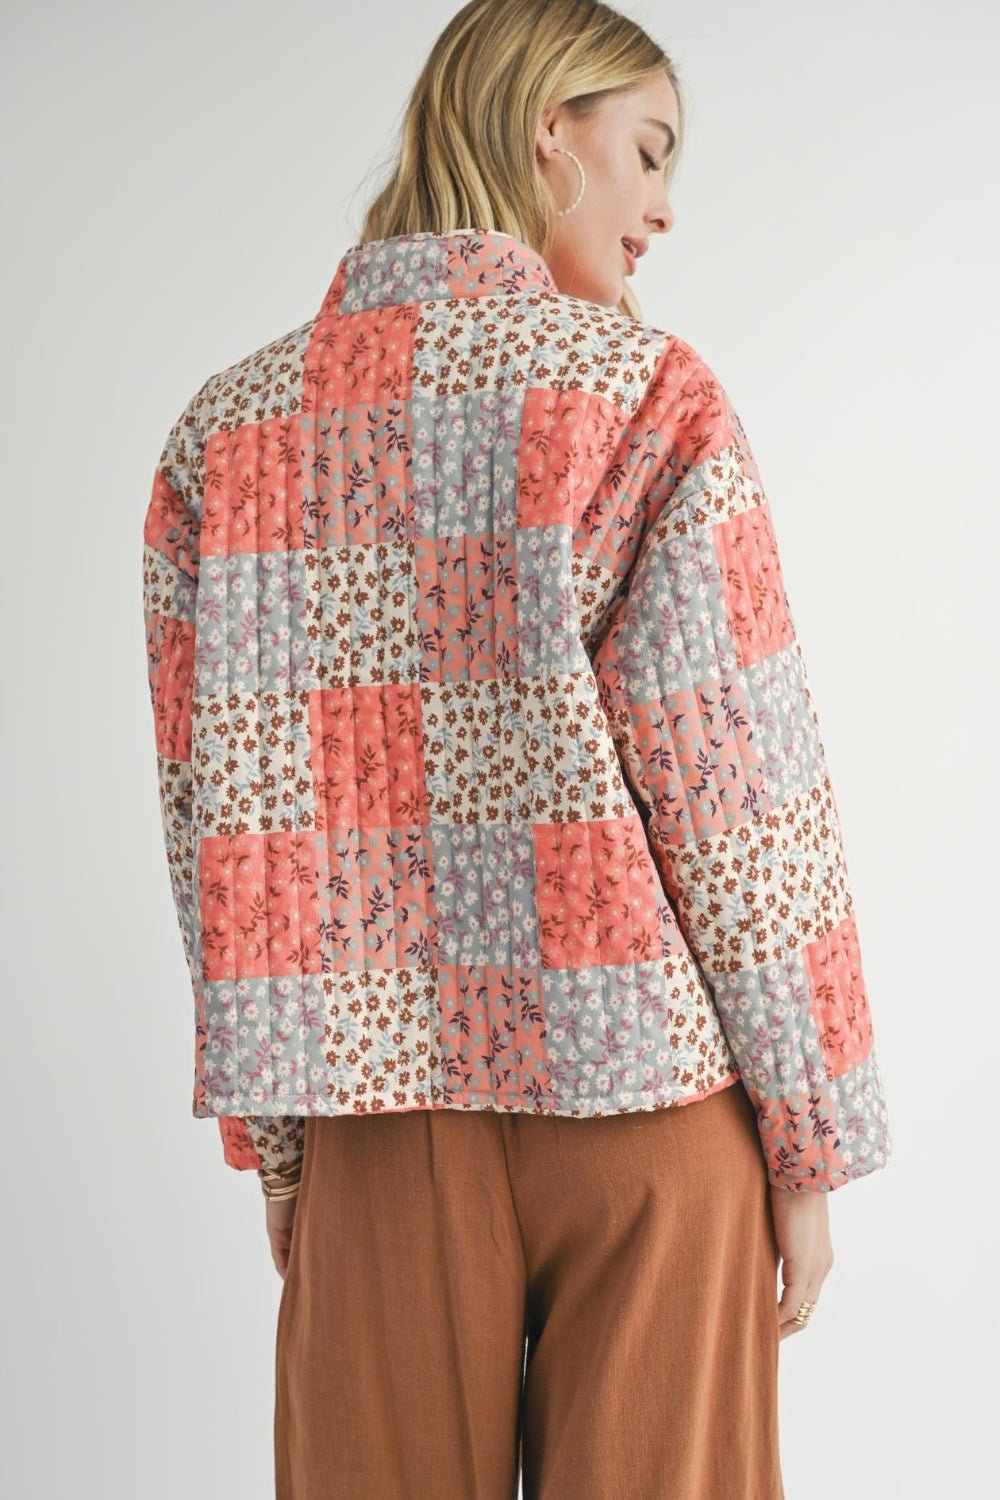 Women's Patchwork Quilted Lightweigth Floral Jacket | Outerwear | Pink - Women's Jacket - Blooming Daily